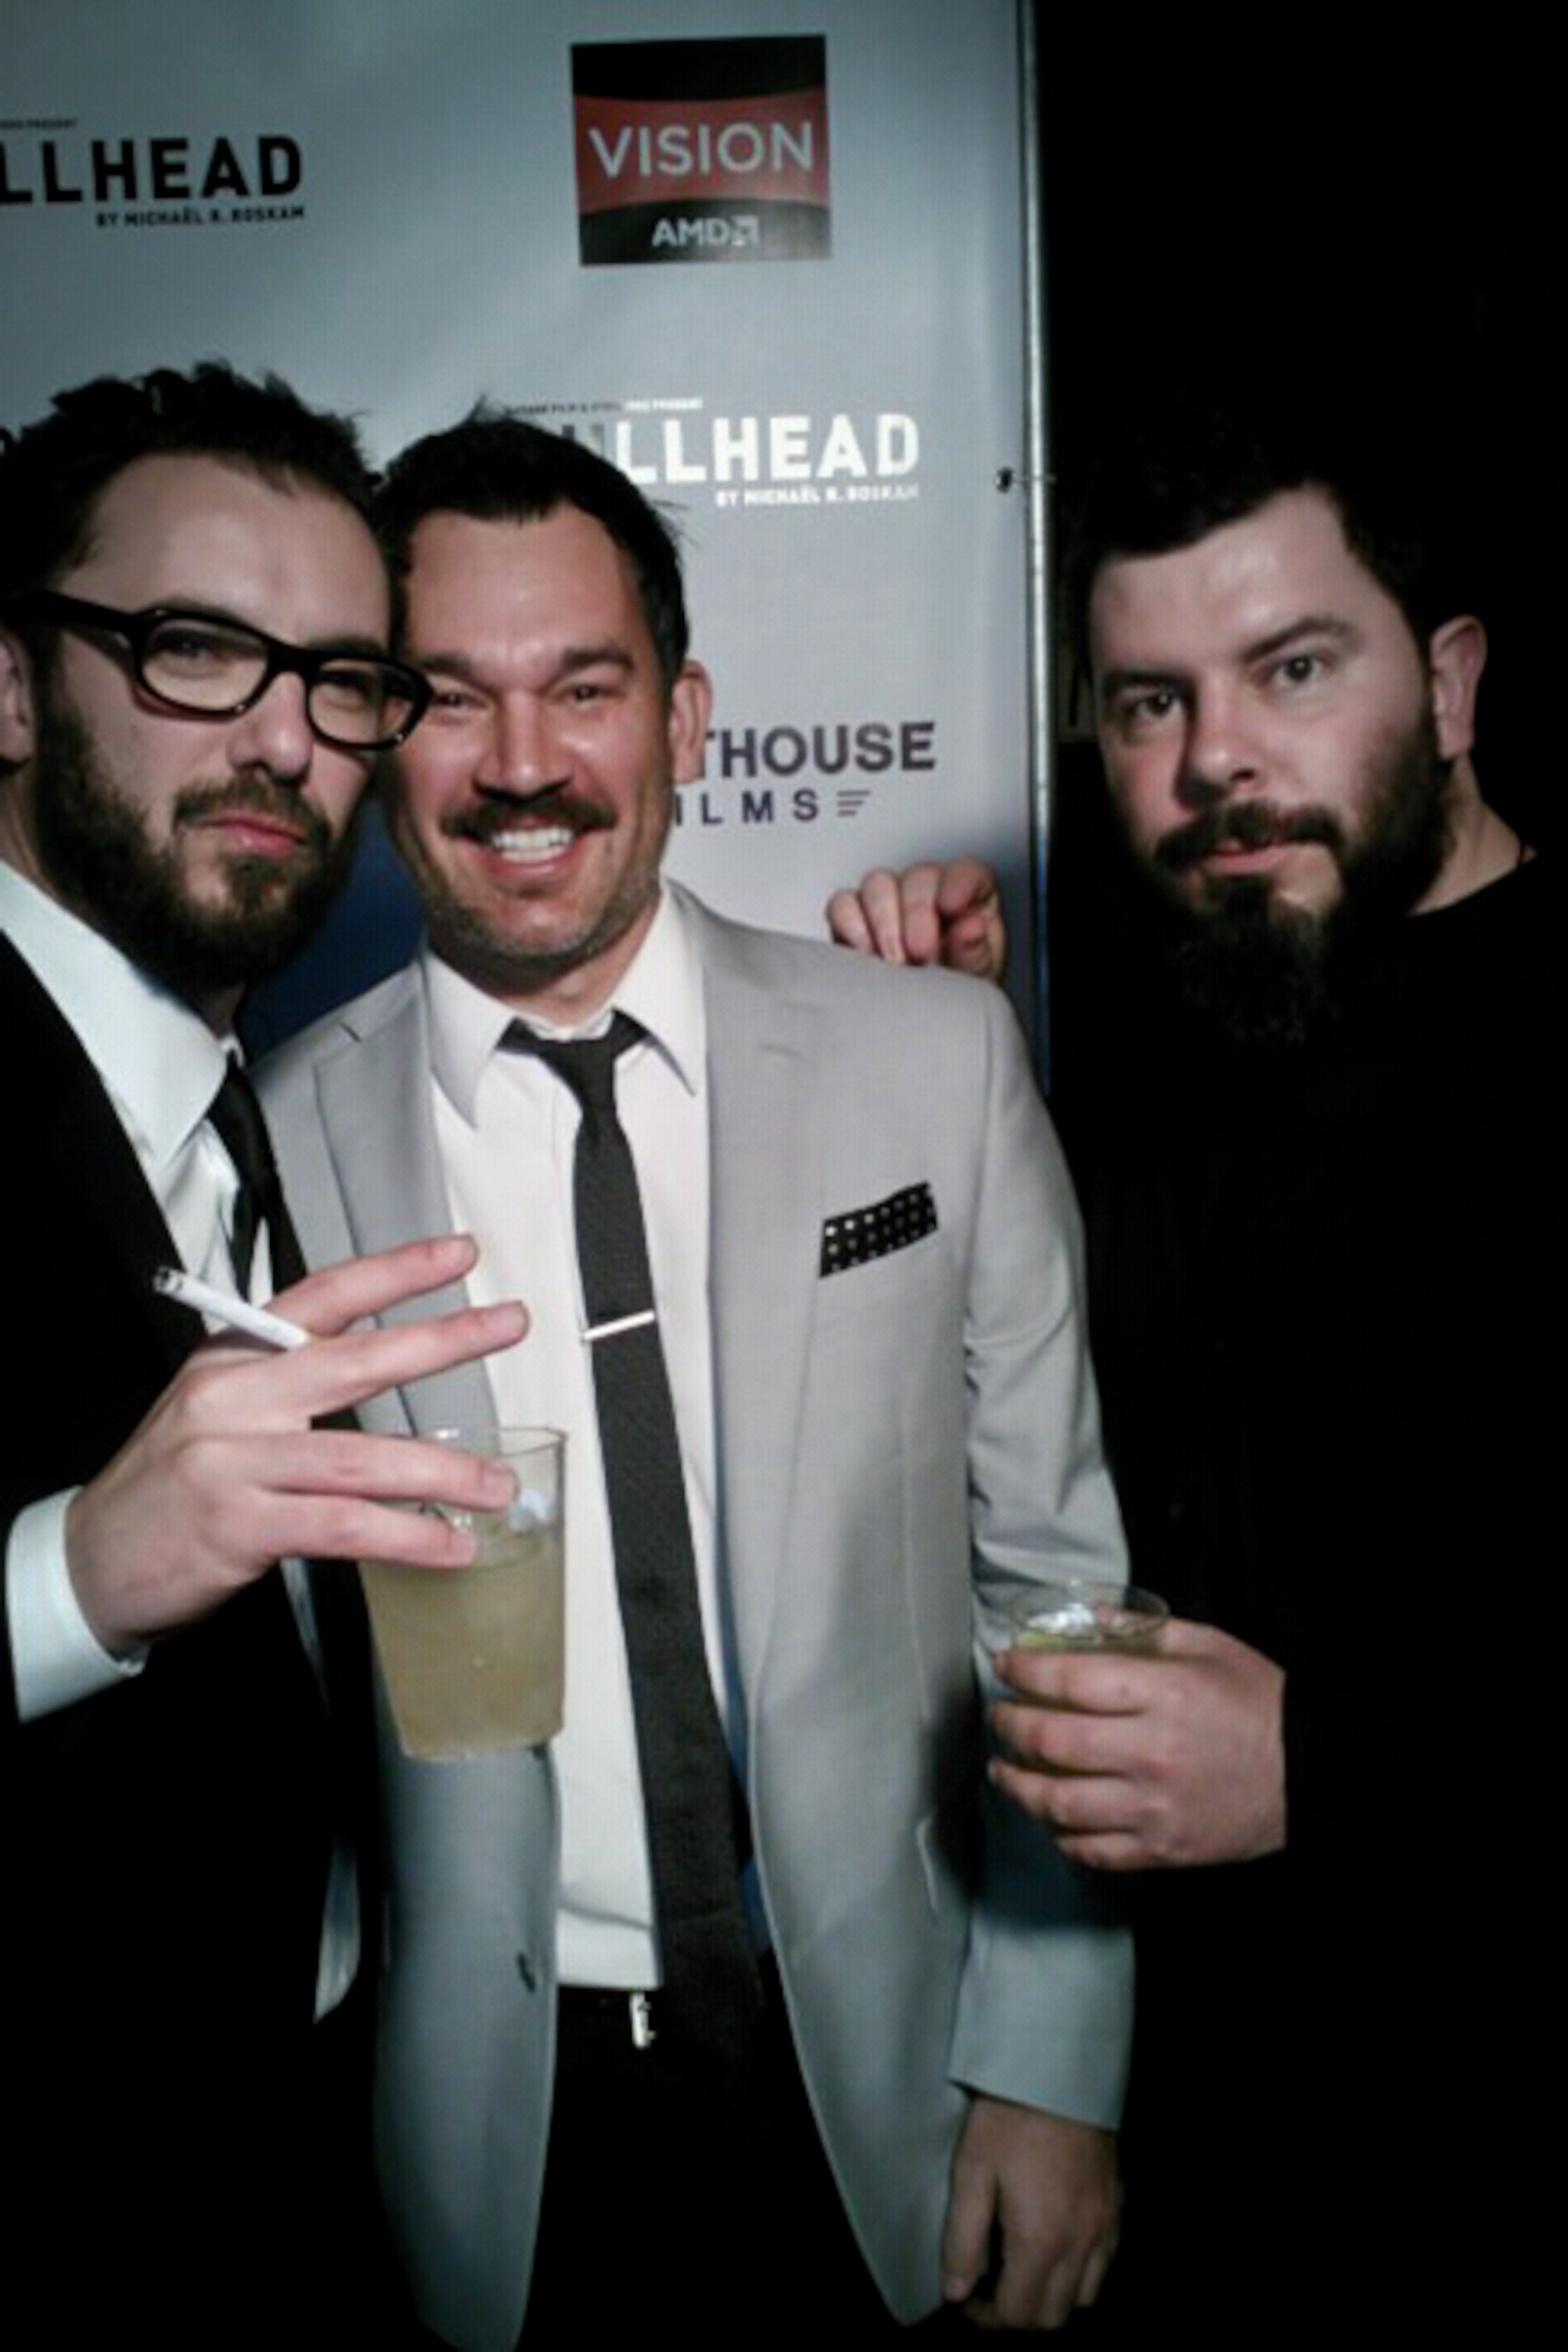 Oscar Party for BULLHEAD with friend and Director Michael Roskam and Andy Greenfield.